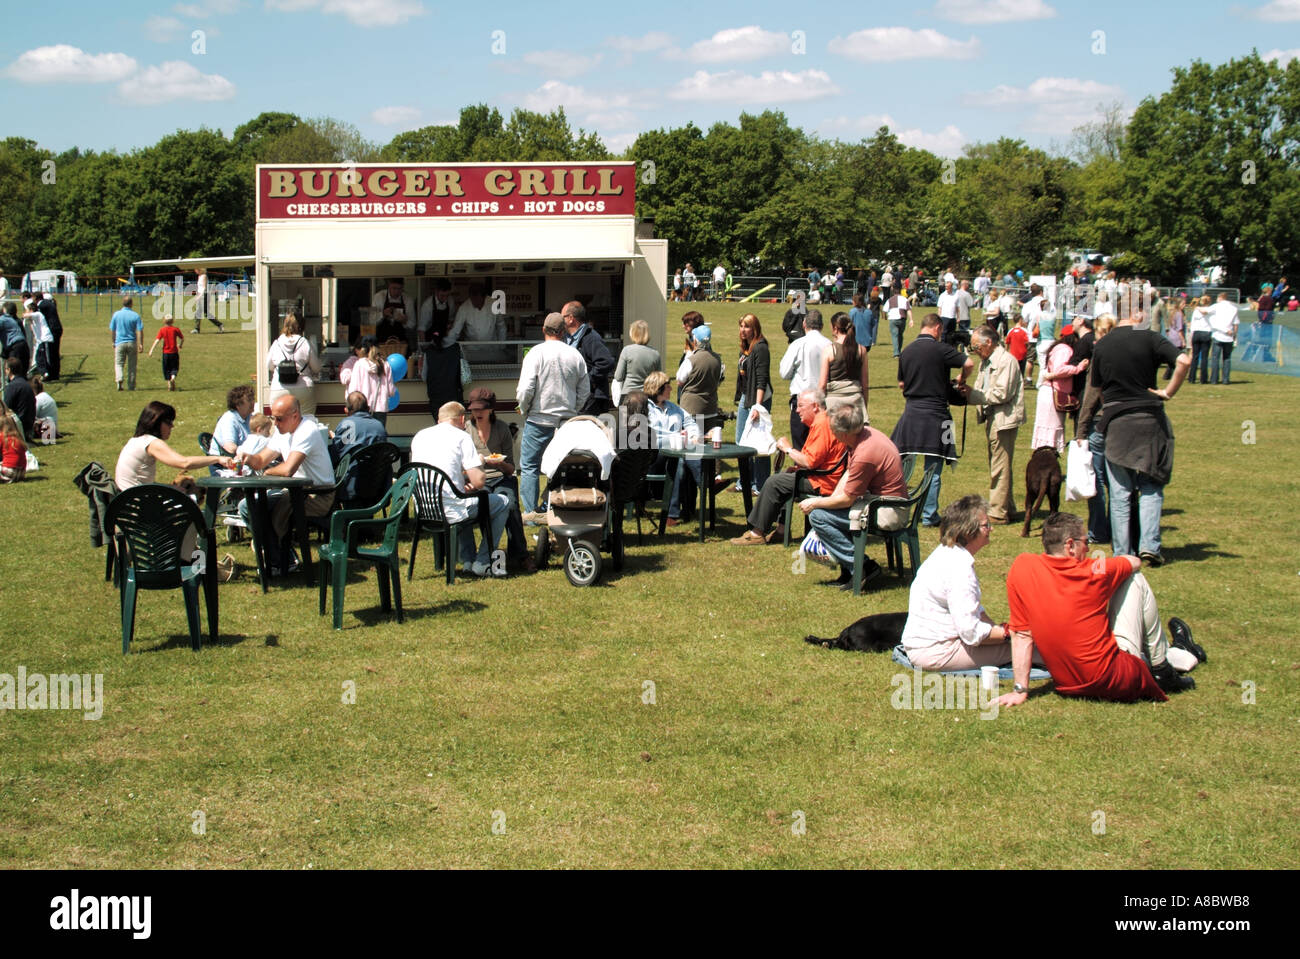 England dog show event people around mobile food trailer facility Stock Photo